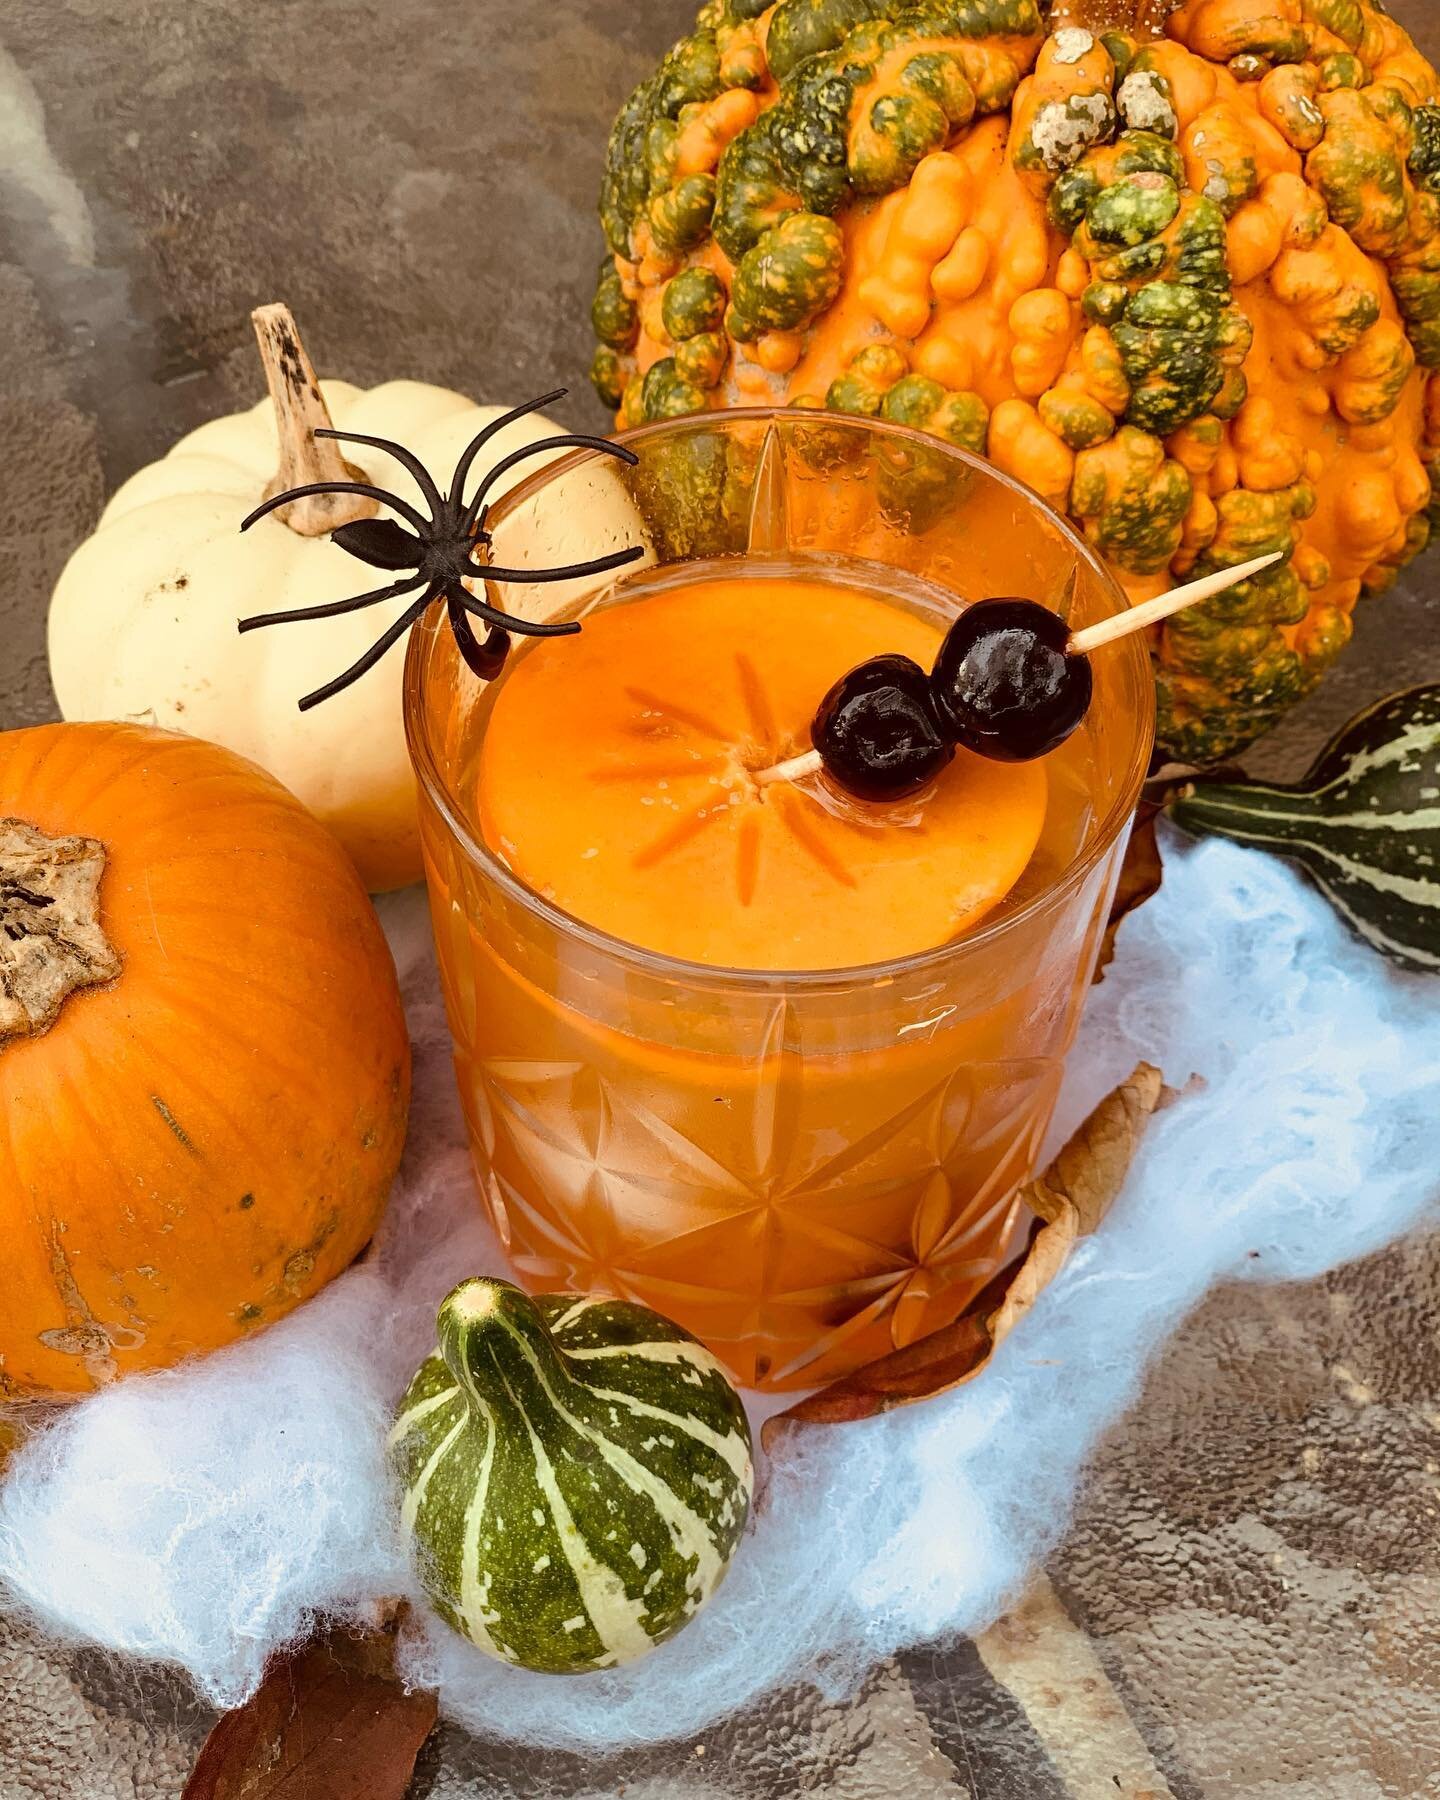 Am I am influencer yet? Cc @blueapron for The Funky Pumpkin 🎃 🍹 #booapron (special thanks to @follytreearboretum for the teeny decorative gourds)